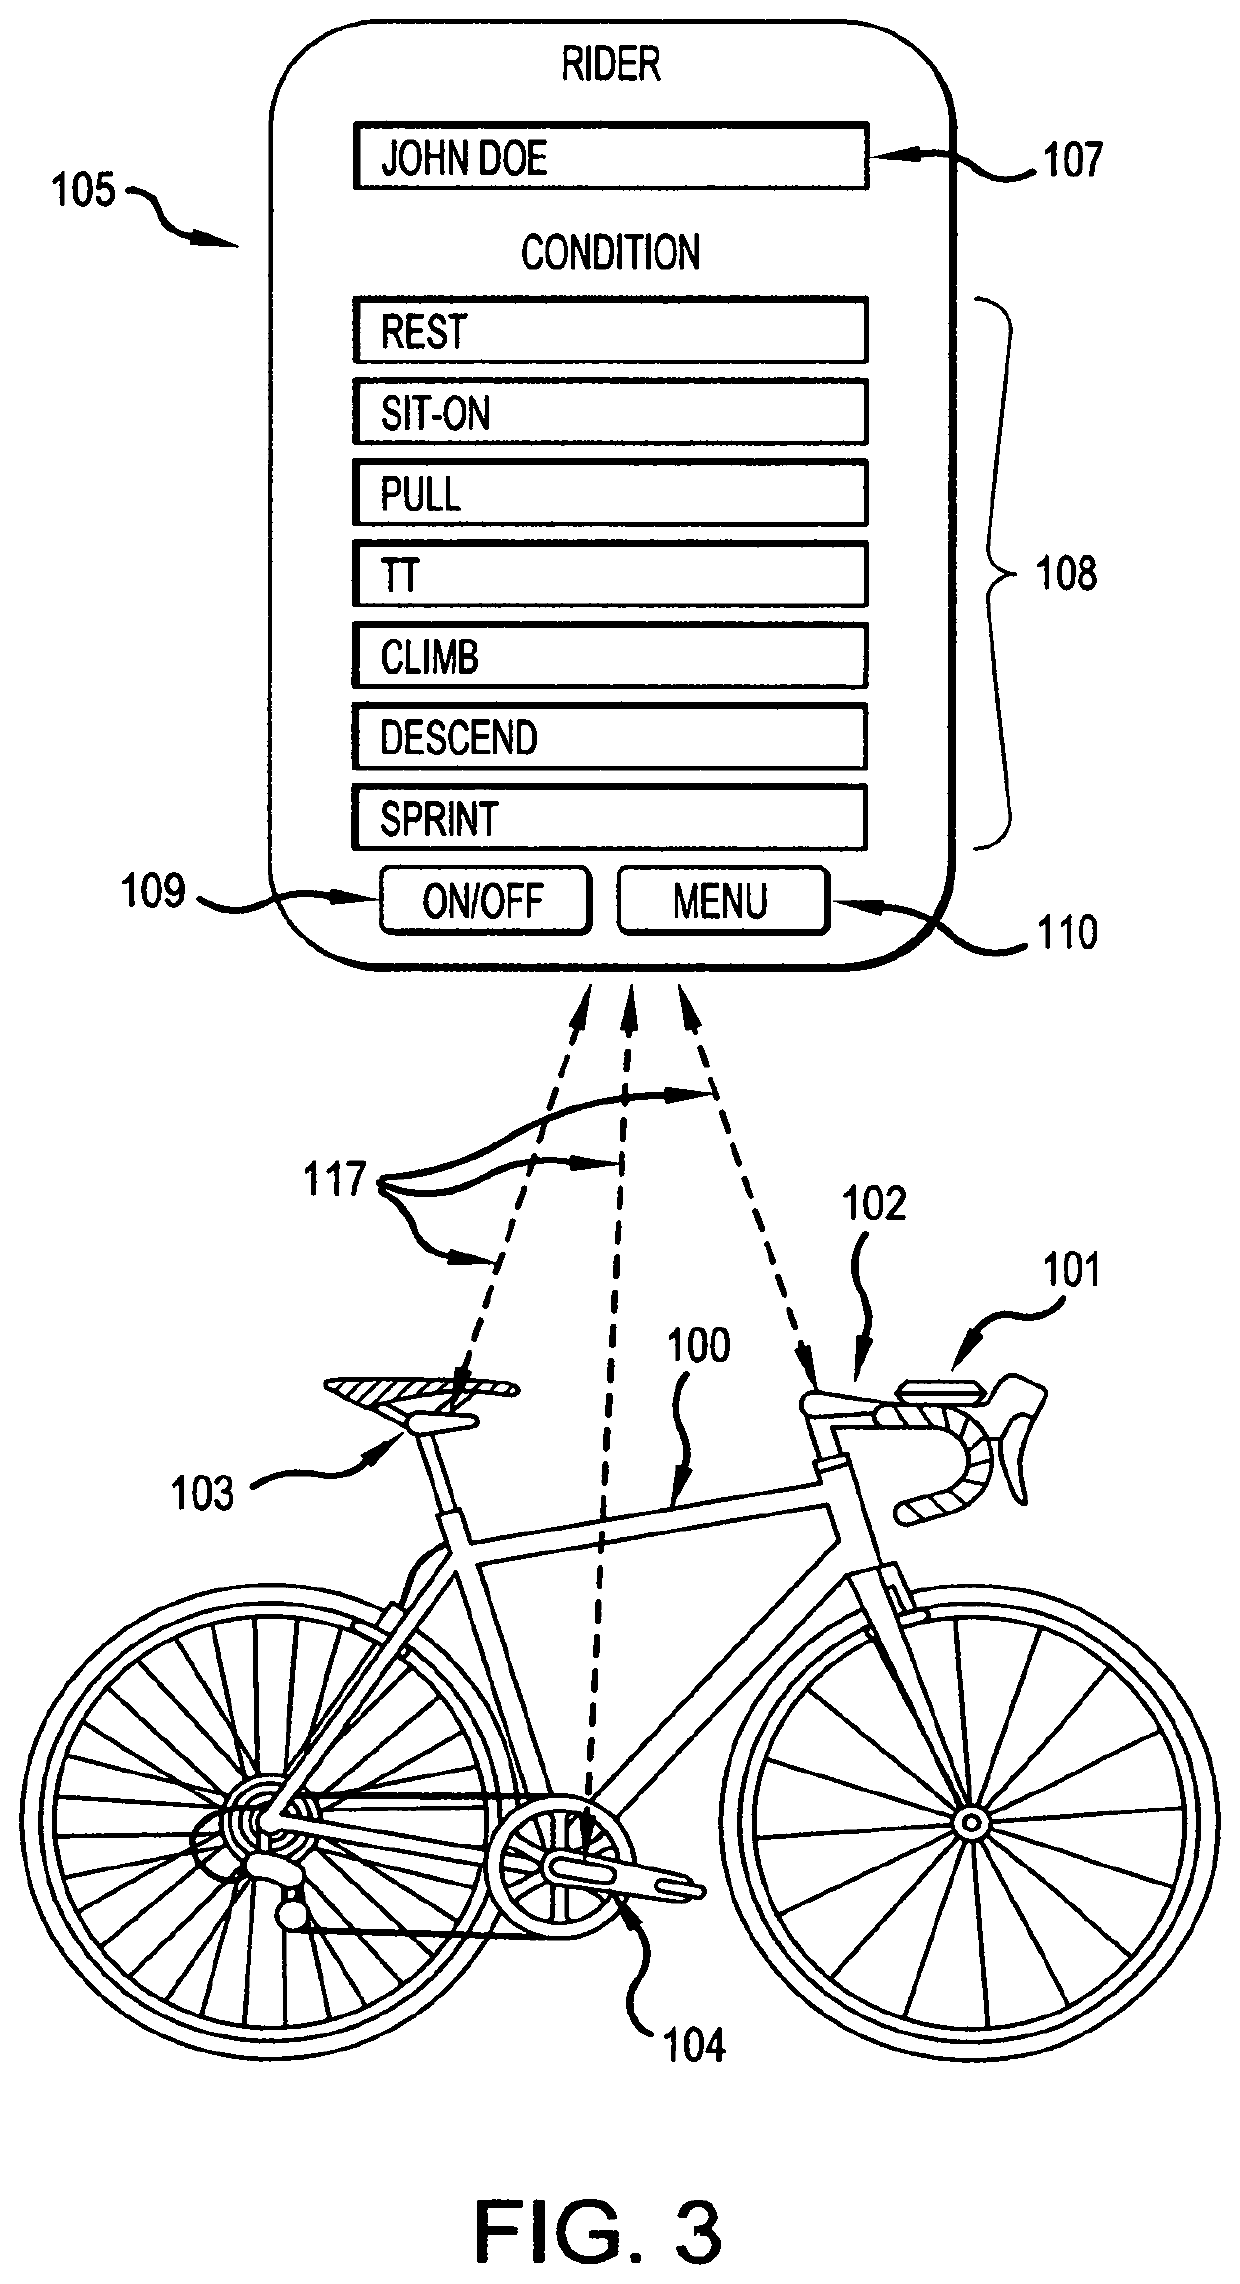 Powered, programmable machine and method for transforming a bicycle to fit particular riders and/or riding conditions